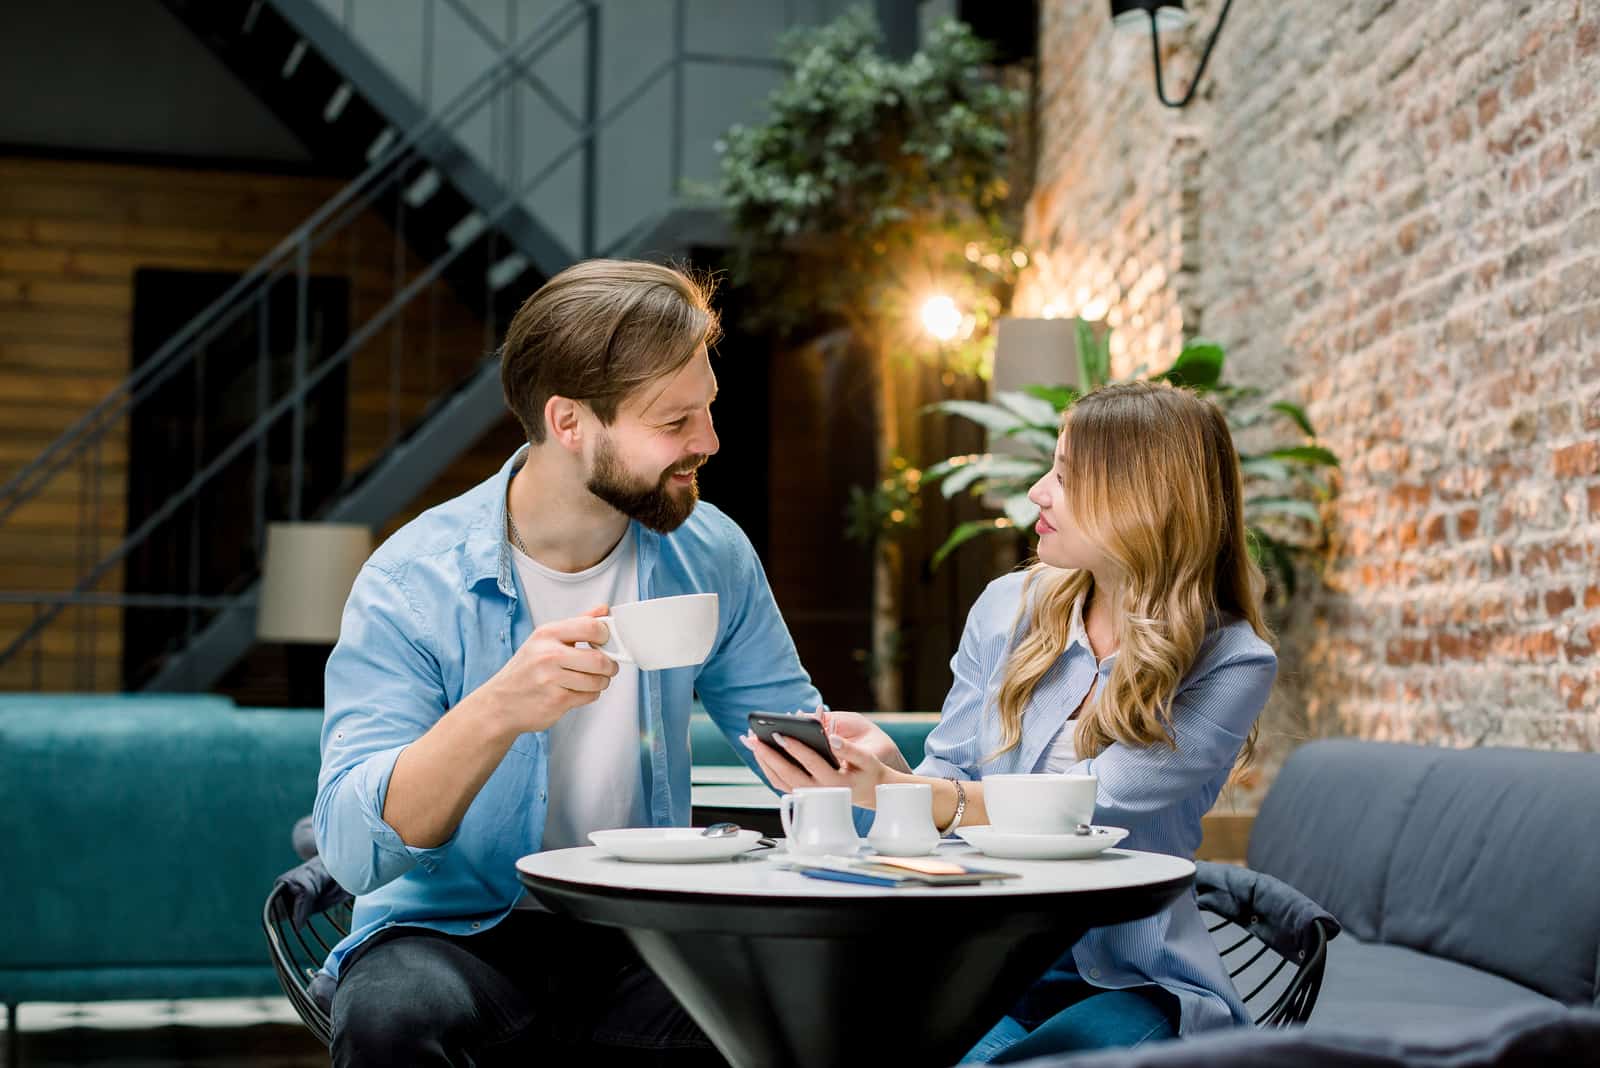 a smiling man and woman sit at a table and talk